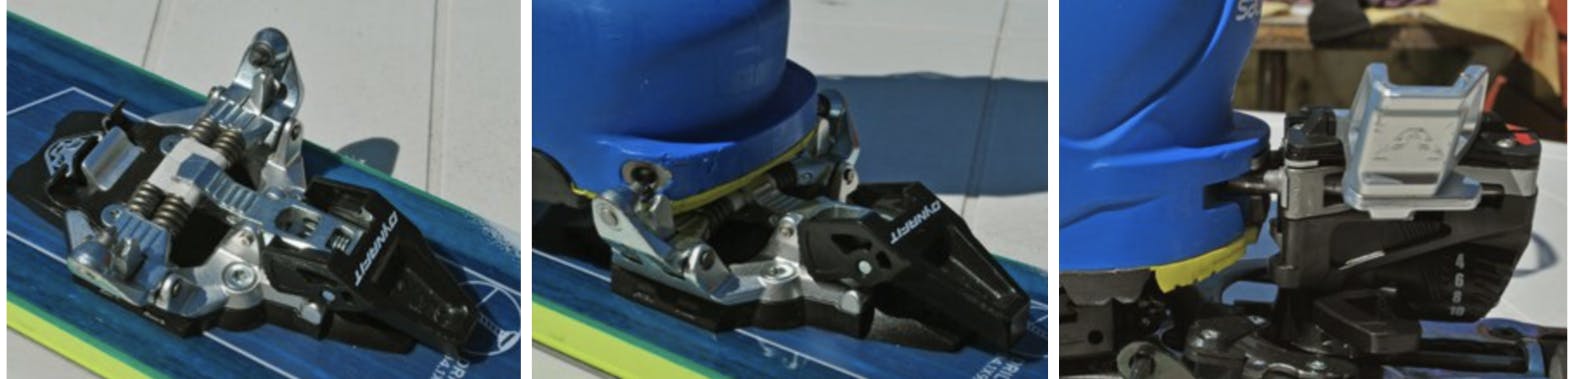 The toe part of a tech binding (left), the toe part of a tech binding as it clips into a boot (middle), and the heel of a tech binding (right). 